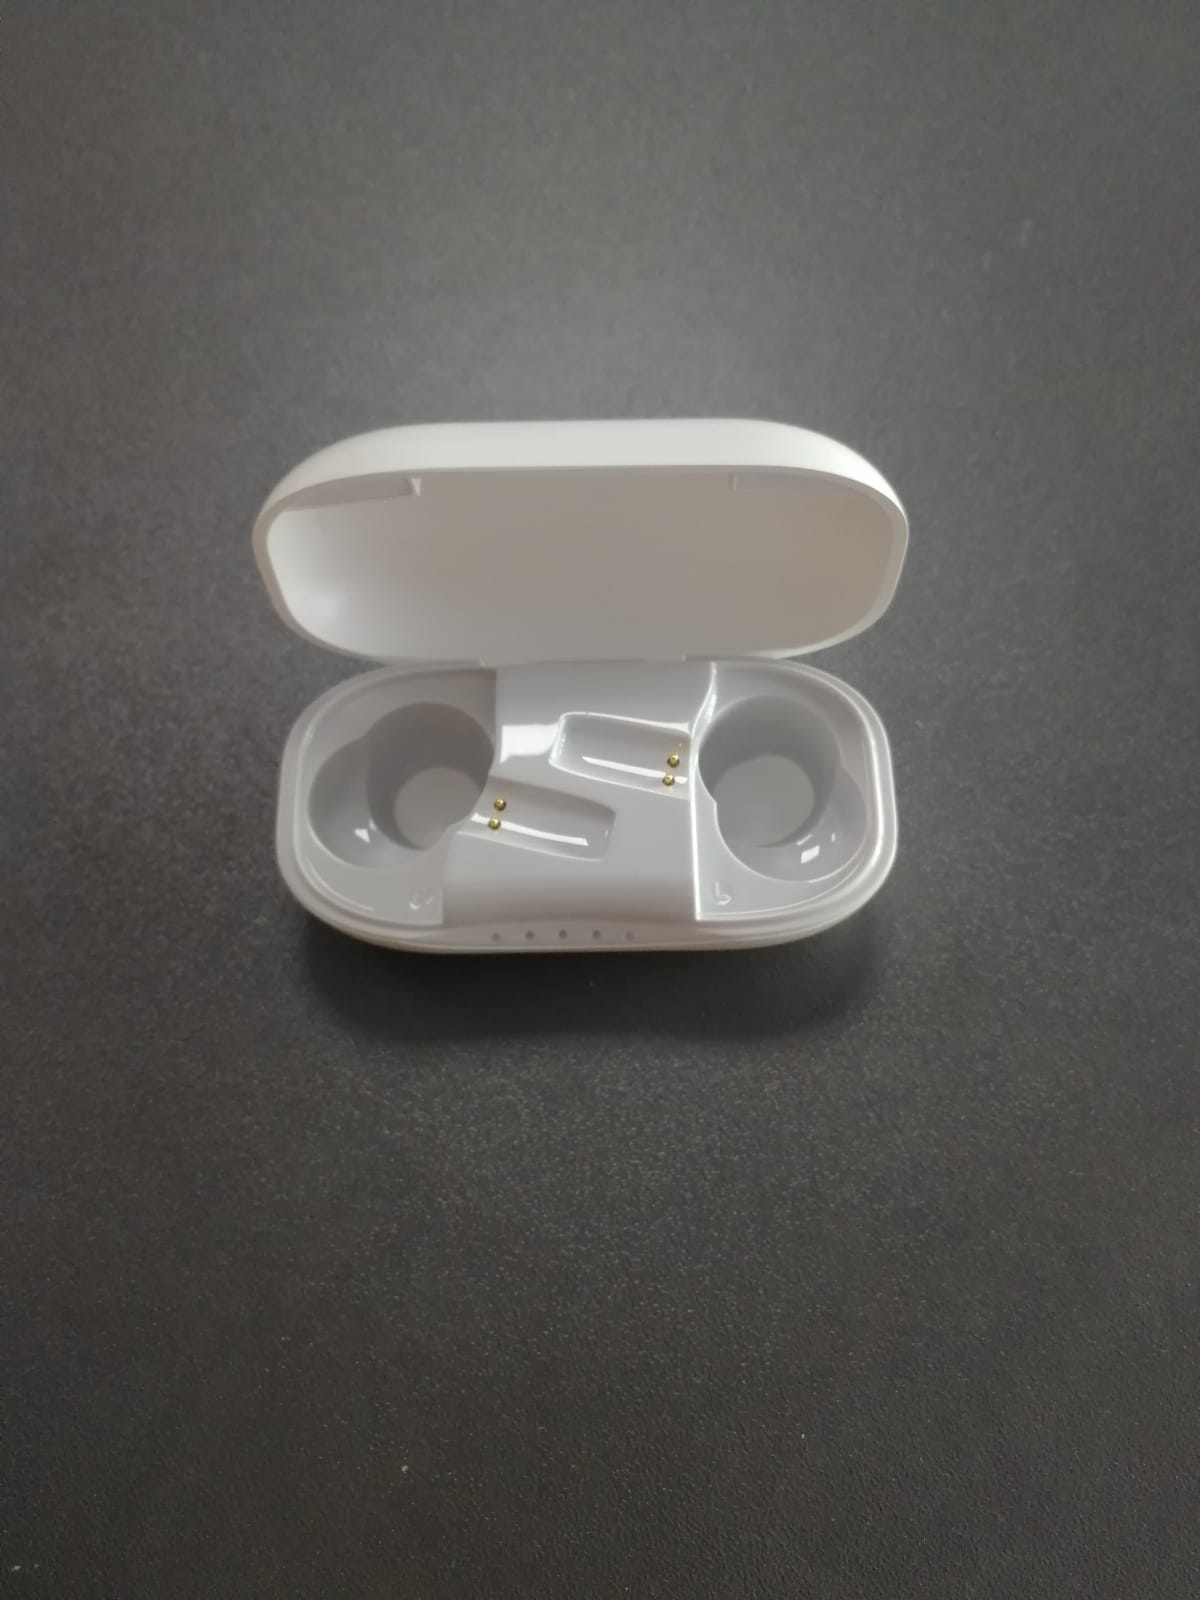 YES, IT'S HEARING AIDS! 2 in One, Hearing Aids and Bluetooth Airpods type Headphones.  eEAR-BT-TWS-AP Airpod style hearing aids, very discreet, doesn't look like typical hearing aids rather it looks like fashionable Airpods Bluetooth